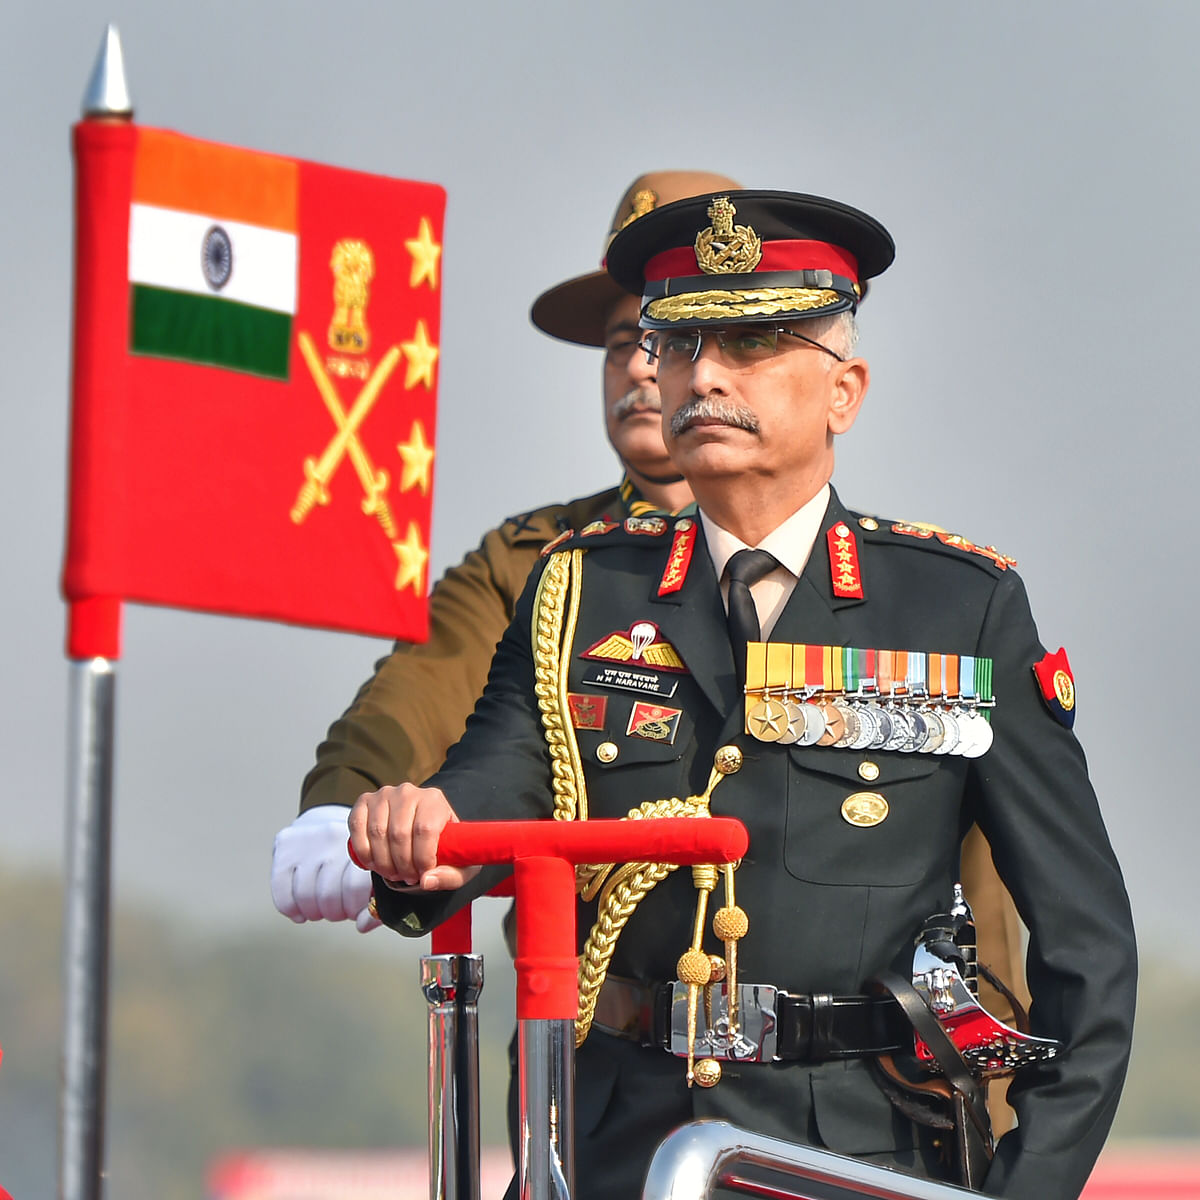 With CDS and DMA, synergy among three services will get fillip: Army chief